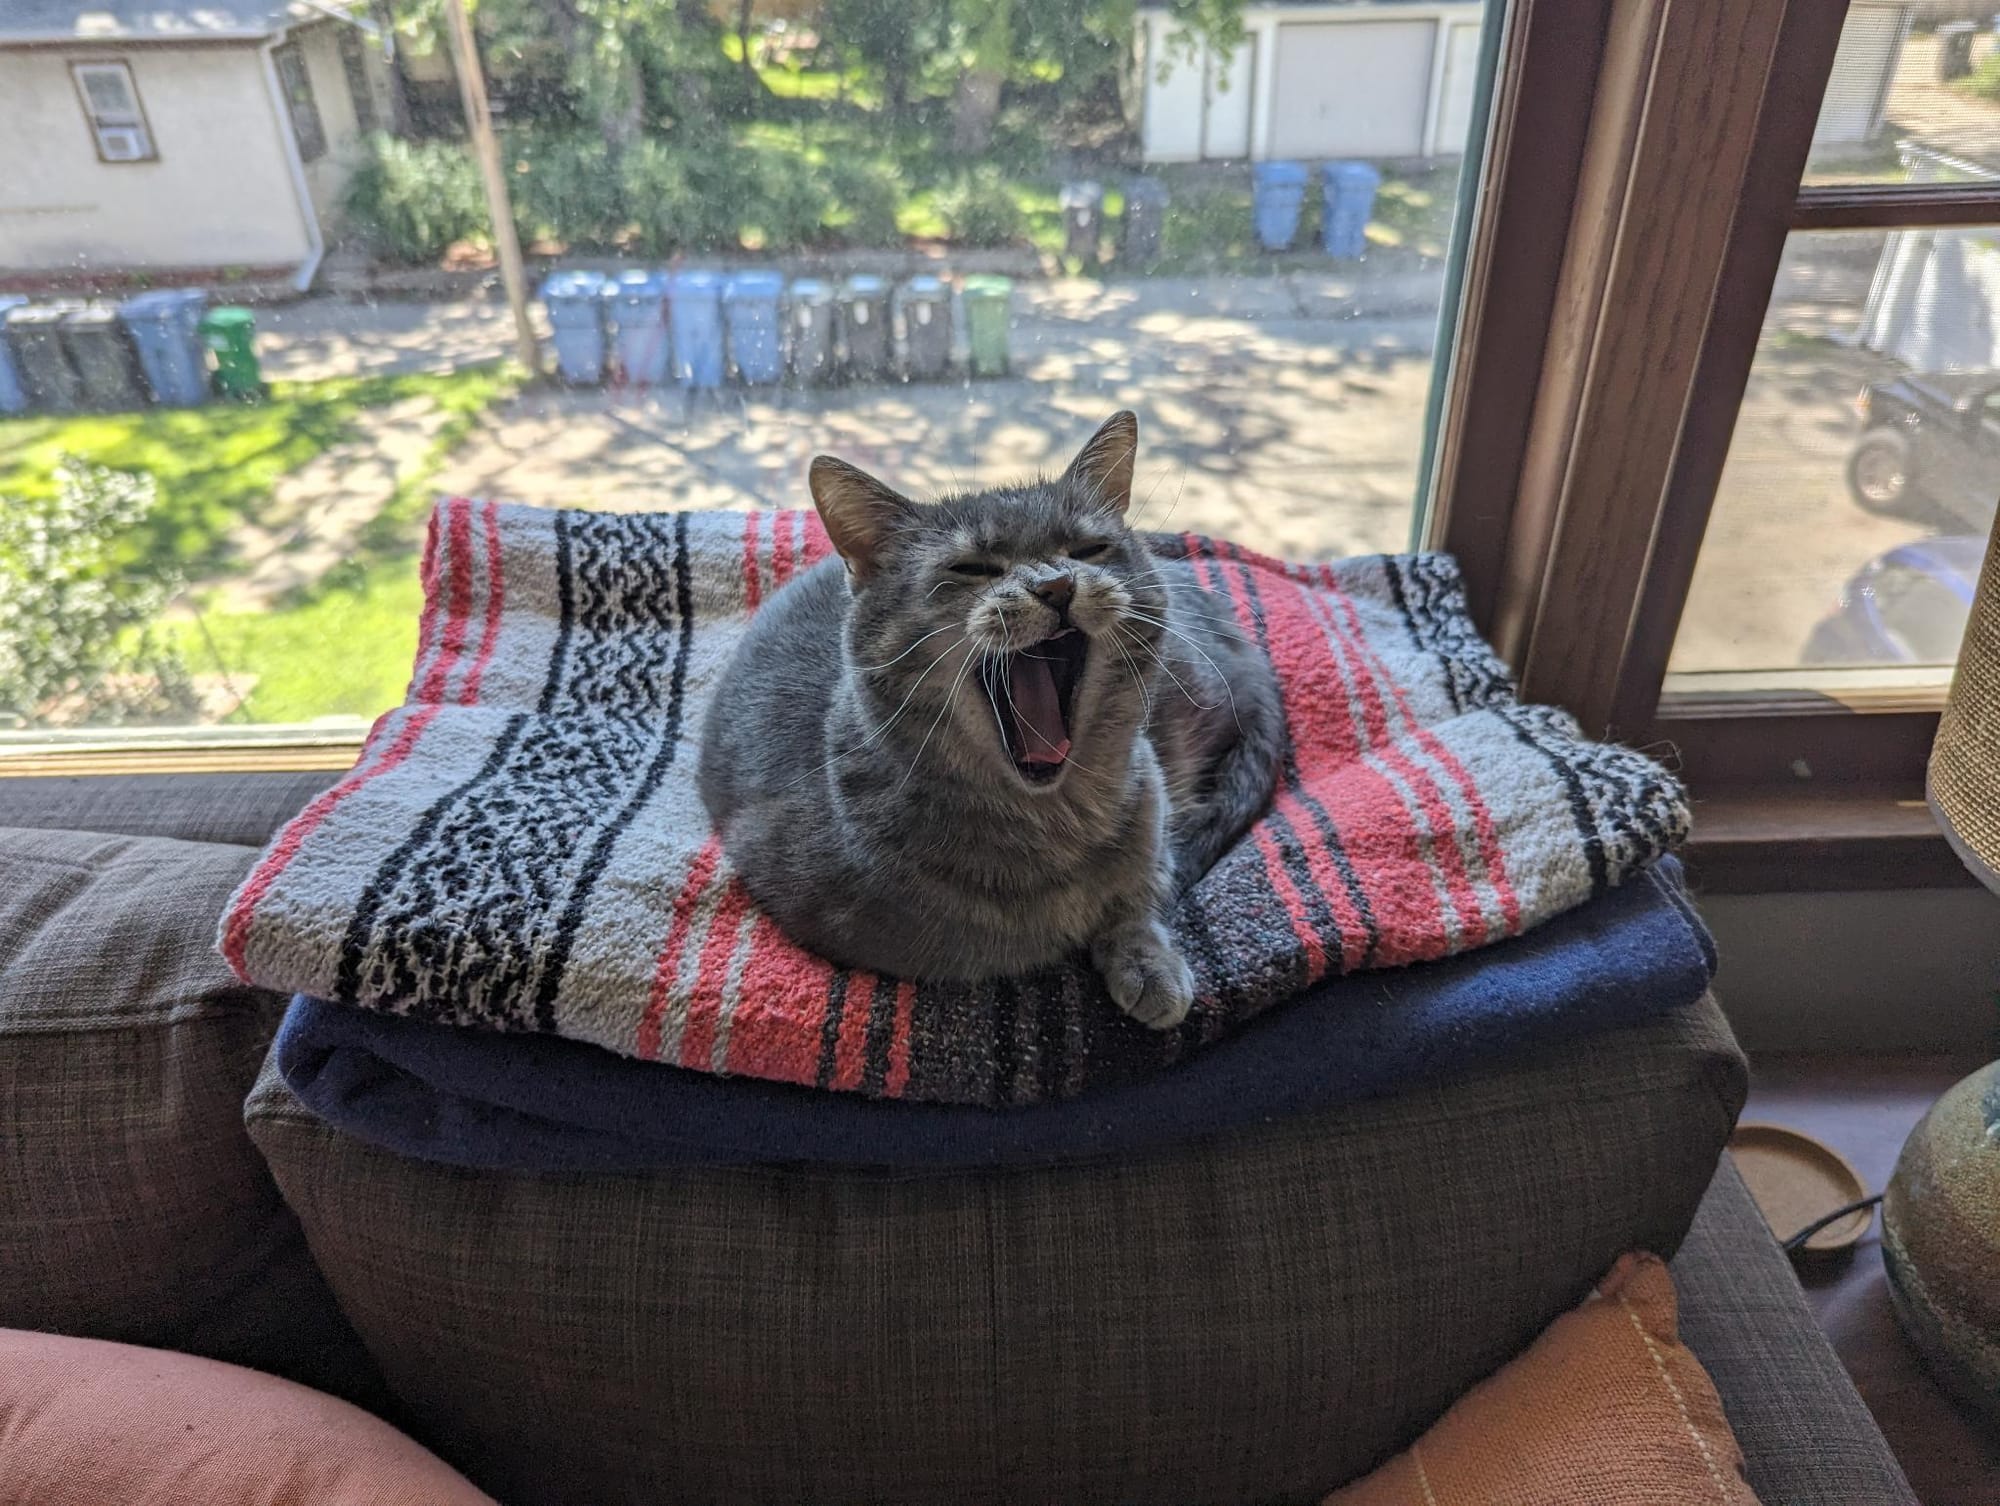 Masha, a gray cat, laying on a pile of blankets and yawning.